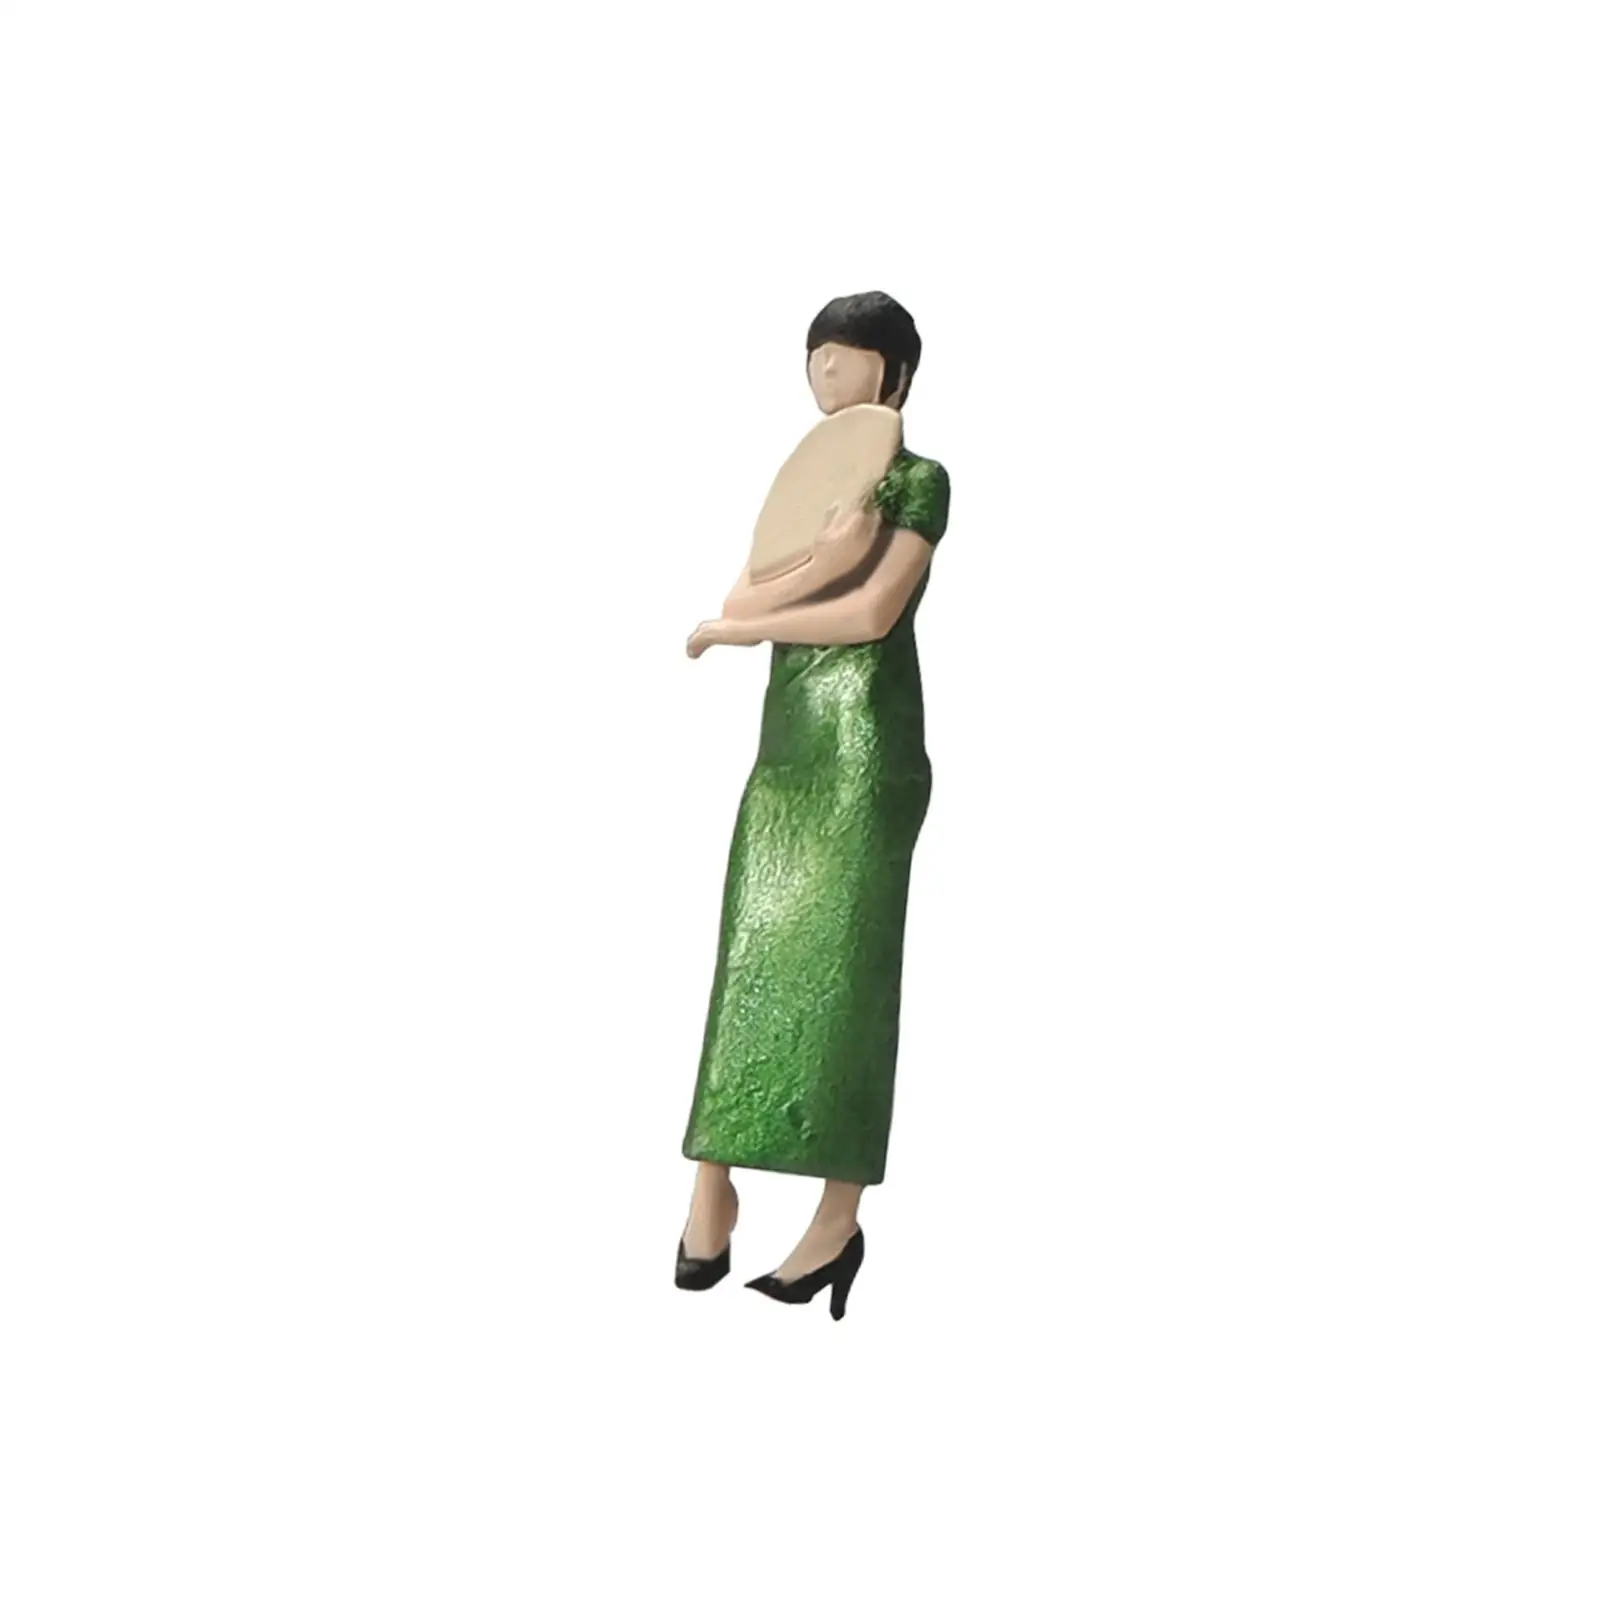 1/64 Scale People Figure Cheongsam Girl Resie for Micro Landscapes Dollhouse